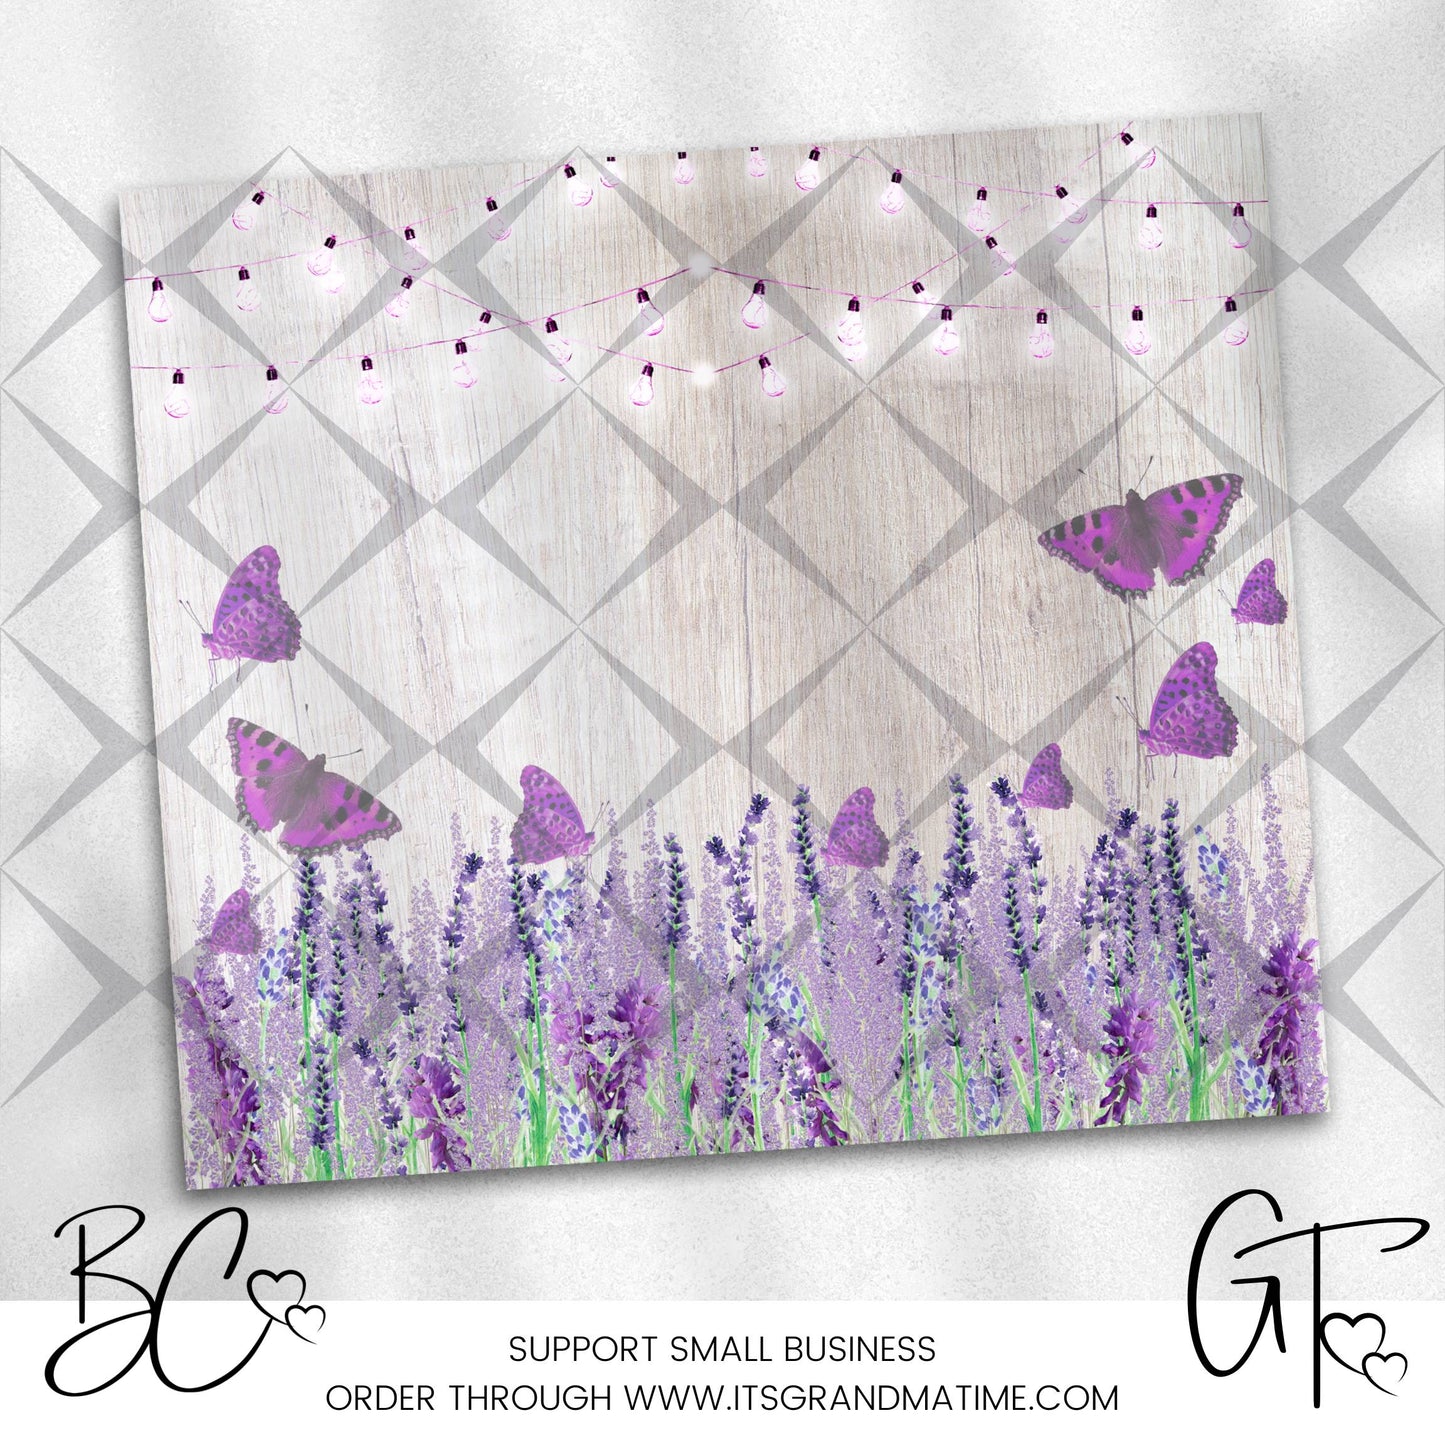 SUB924 Lavender Flowers with Butterflies Tumbler Sublimation Transfer